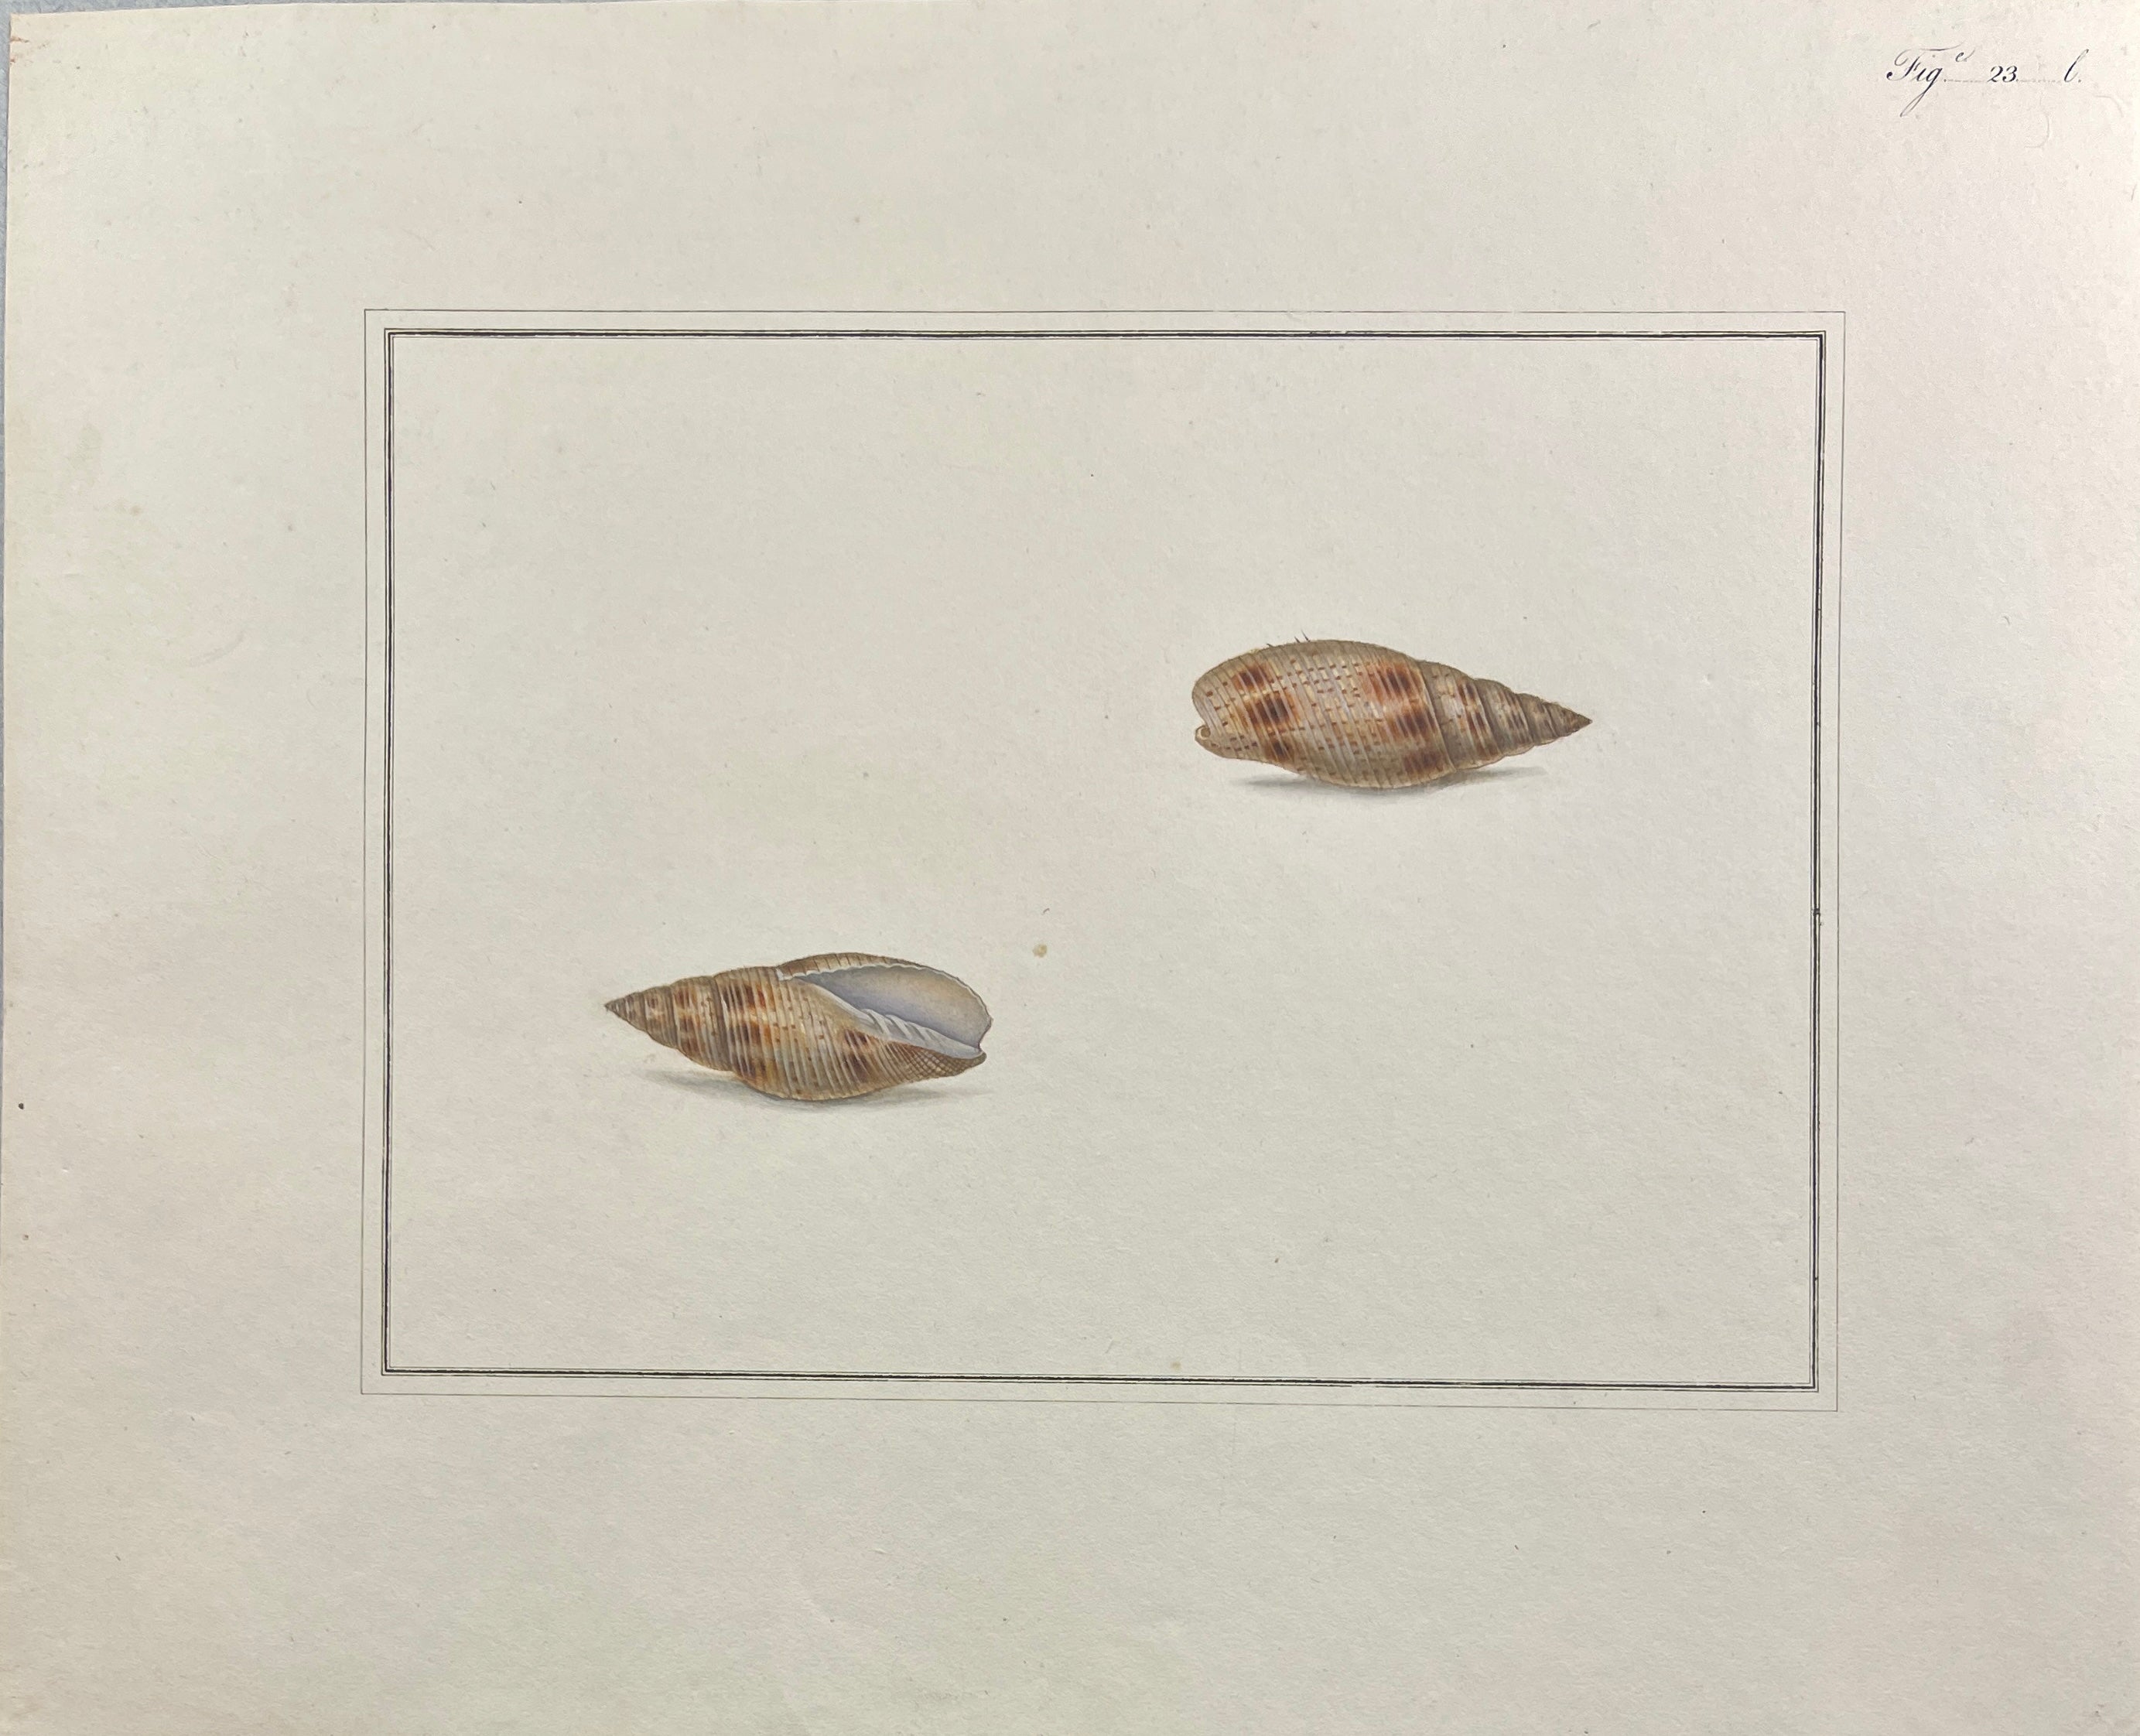 Thomas Martyn 1784 Original Clouded Mitre Shell Print Plate 23 - Found at Friendly Isles - Hand-Colored Tipped-In Engraving at Adirondack Retro